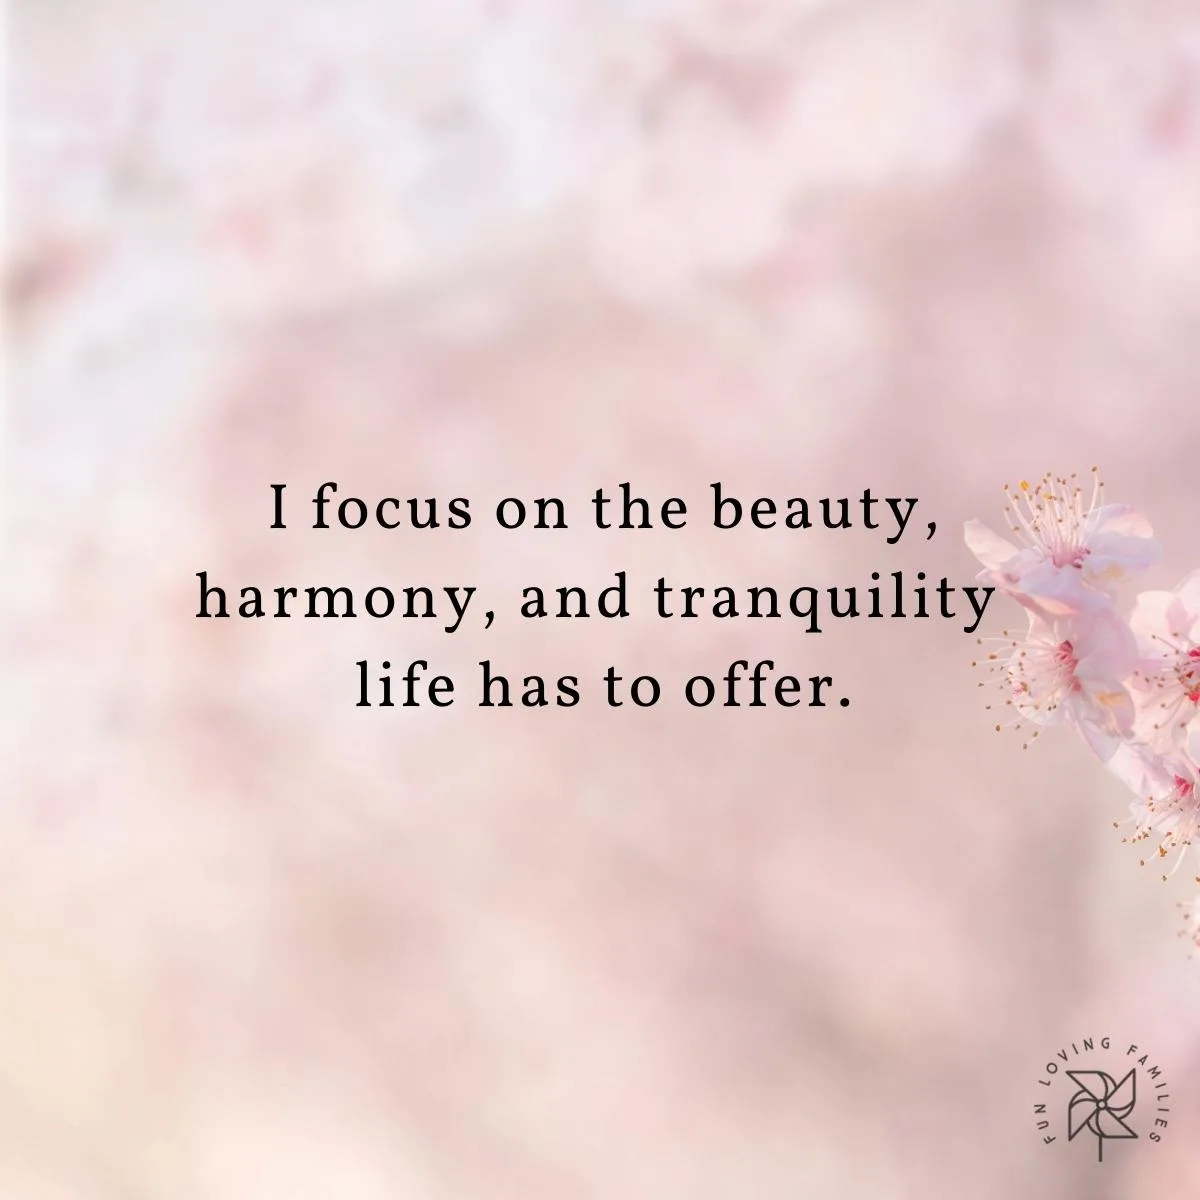 I focus on the beauty, harmony, and tranquility life has to offer affirmation